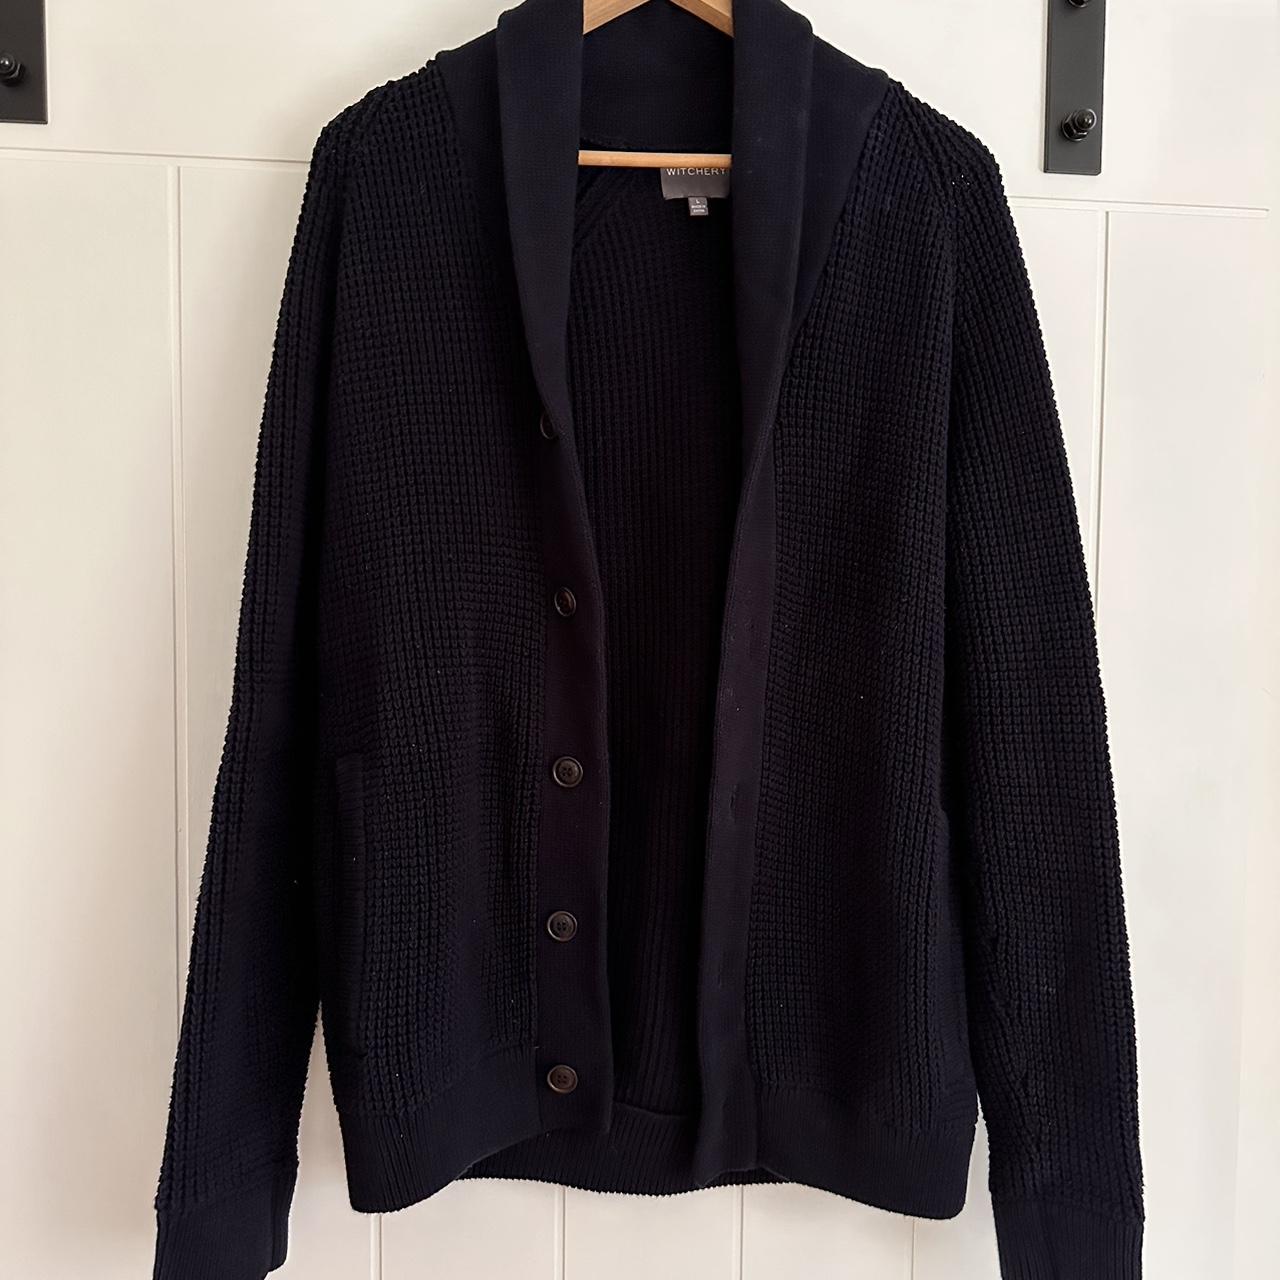 Witchery cotton knit in navy blue. This is such a... - Depop